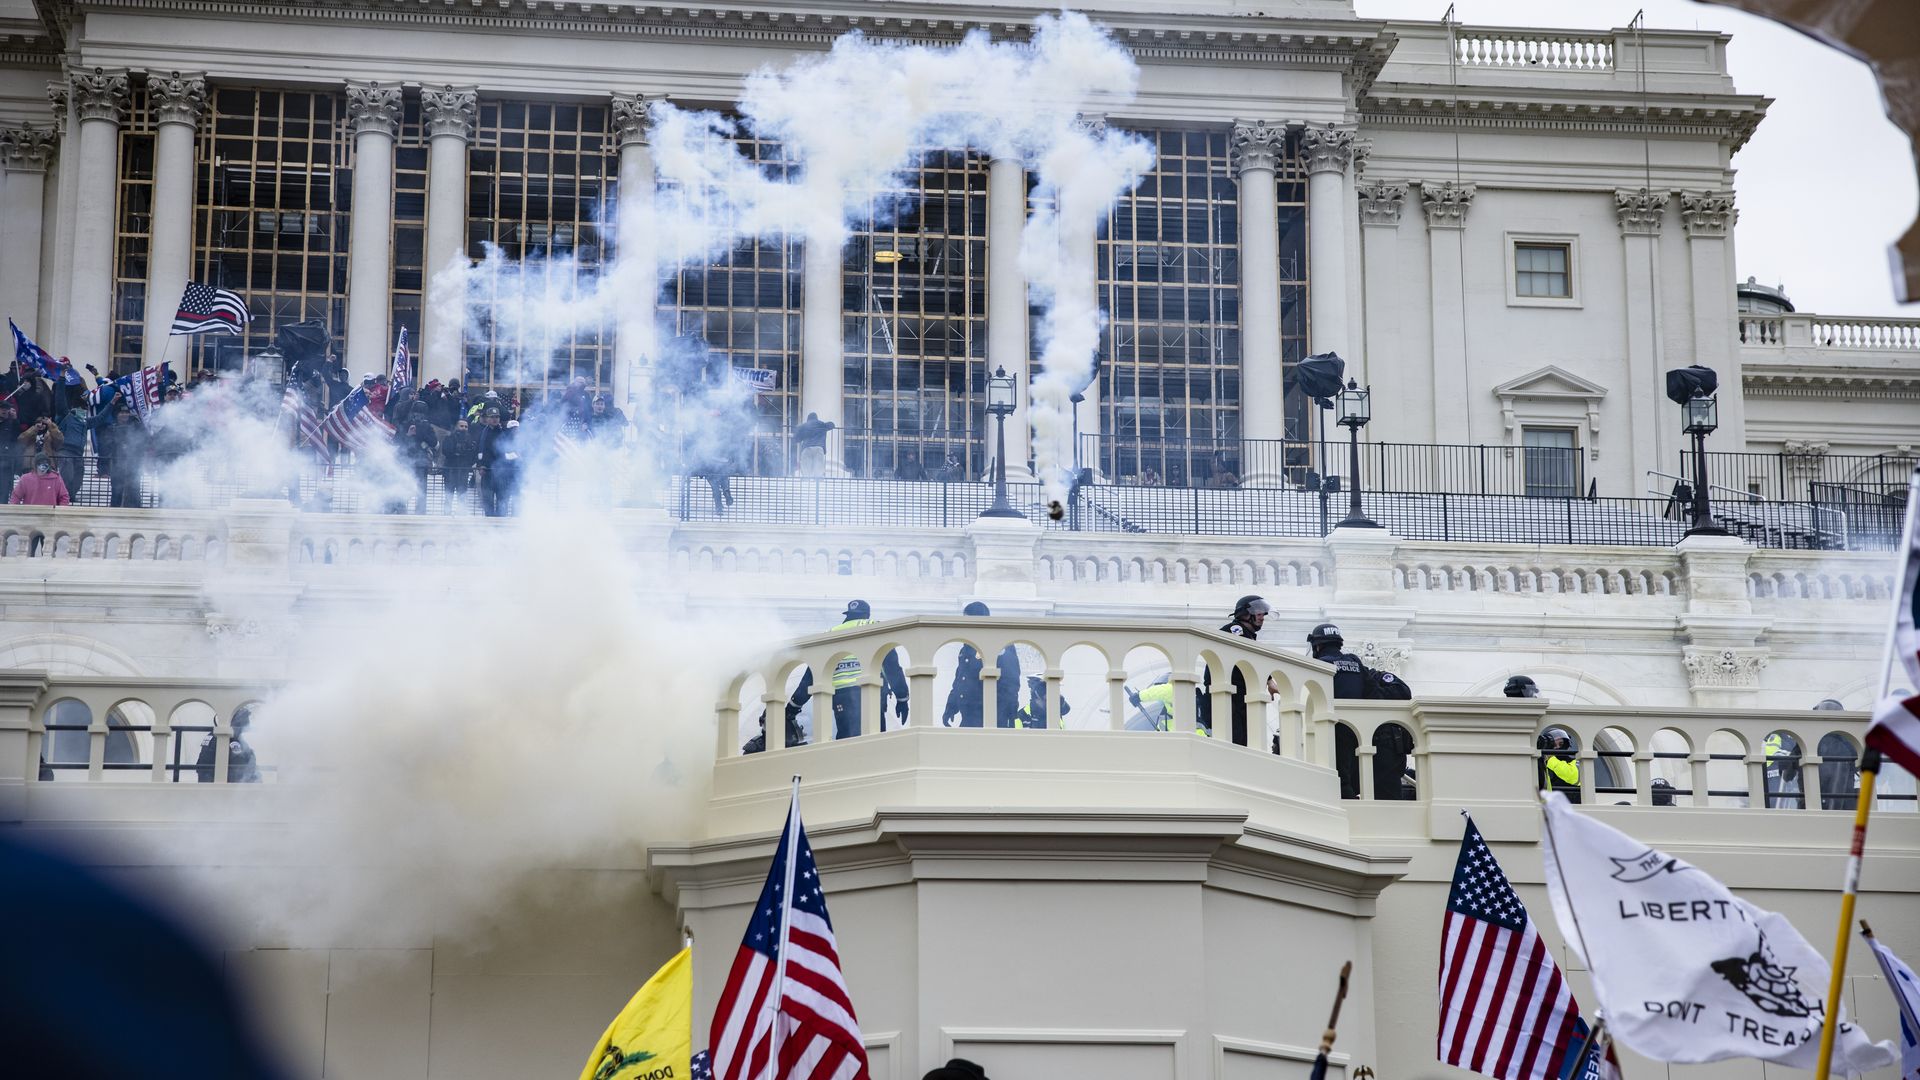 Smoke bombs and flags at the US Capitol